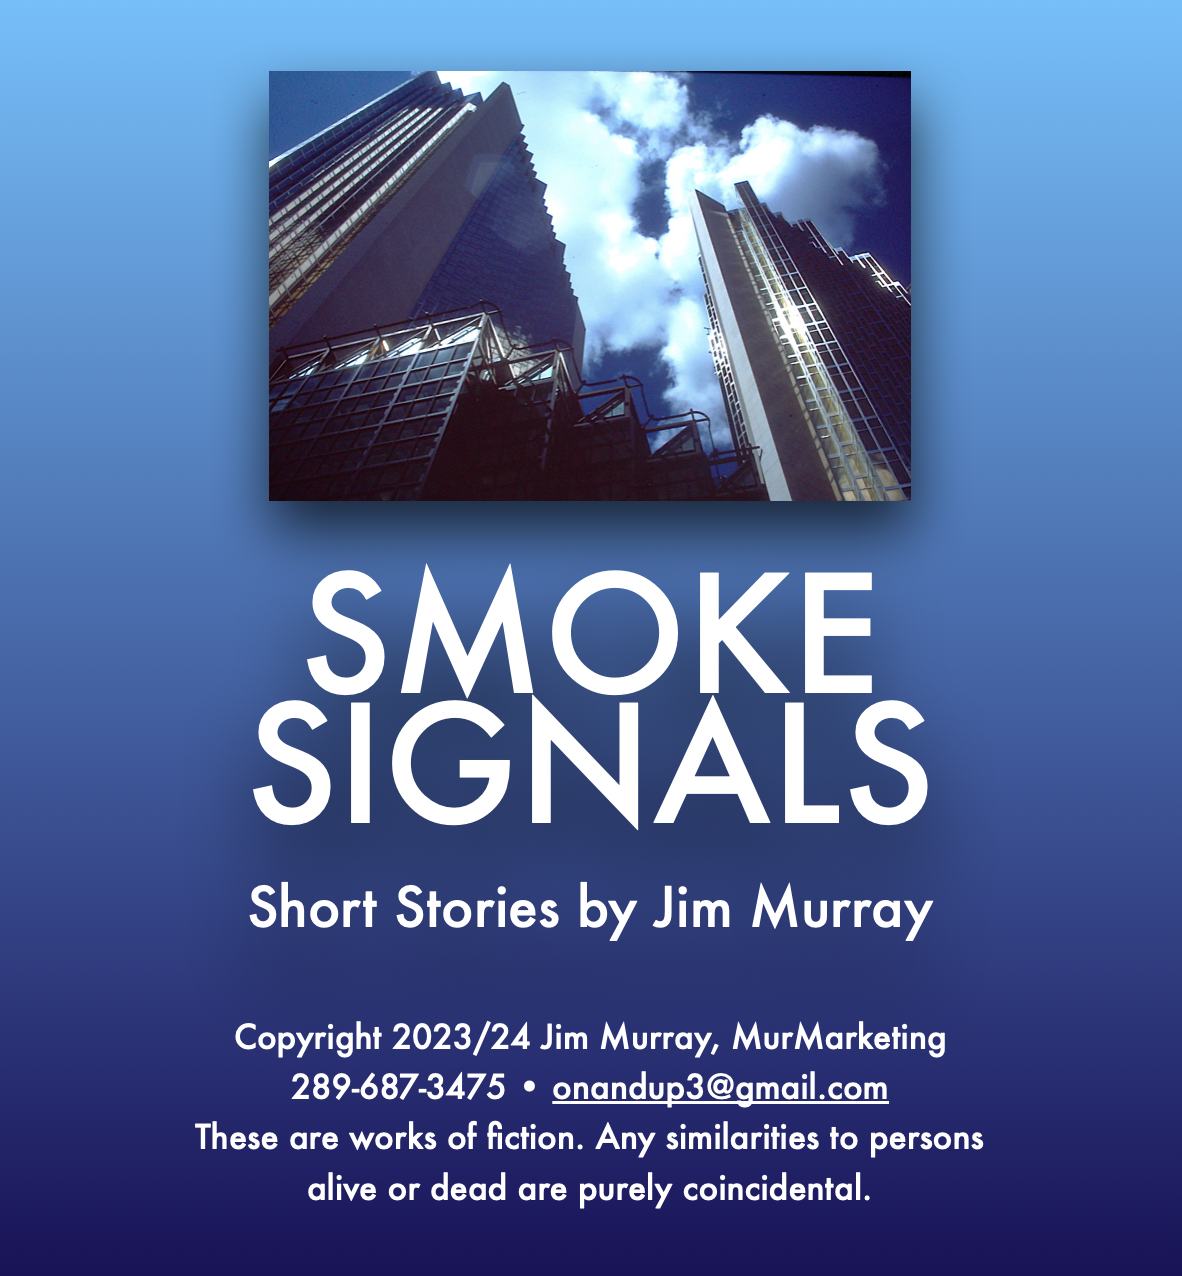 SMOKE
SIGNALS

Short Stories by Jim Murray

Copyright 2023/24 Jim Murray, MurMarketing
289-687-3475 * onandup3@gmail.com

These are works of fiction. Any similarities to persons
alive or dead are purely coincidental.